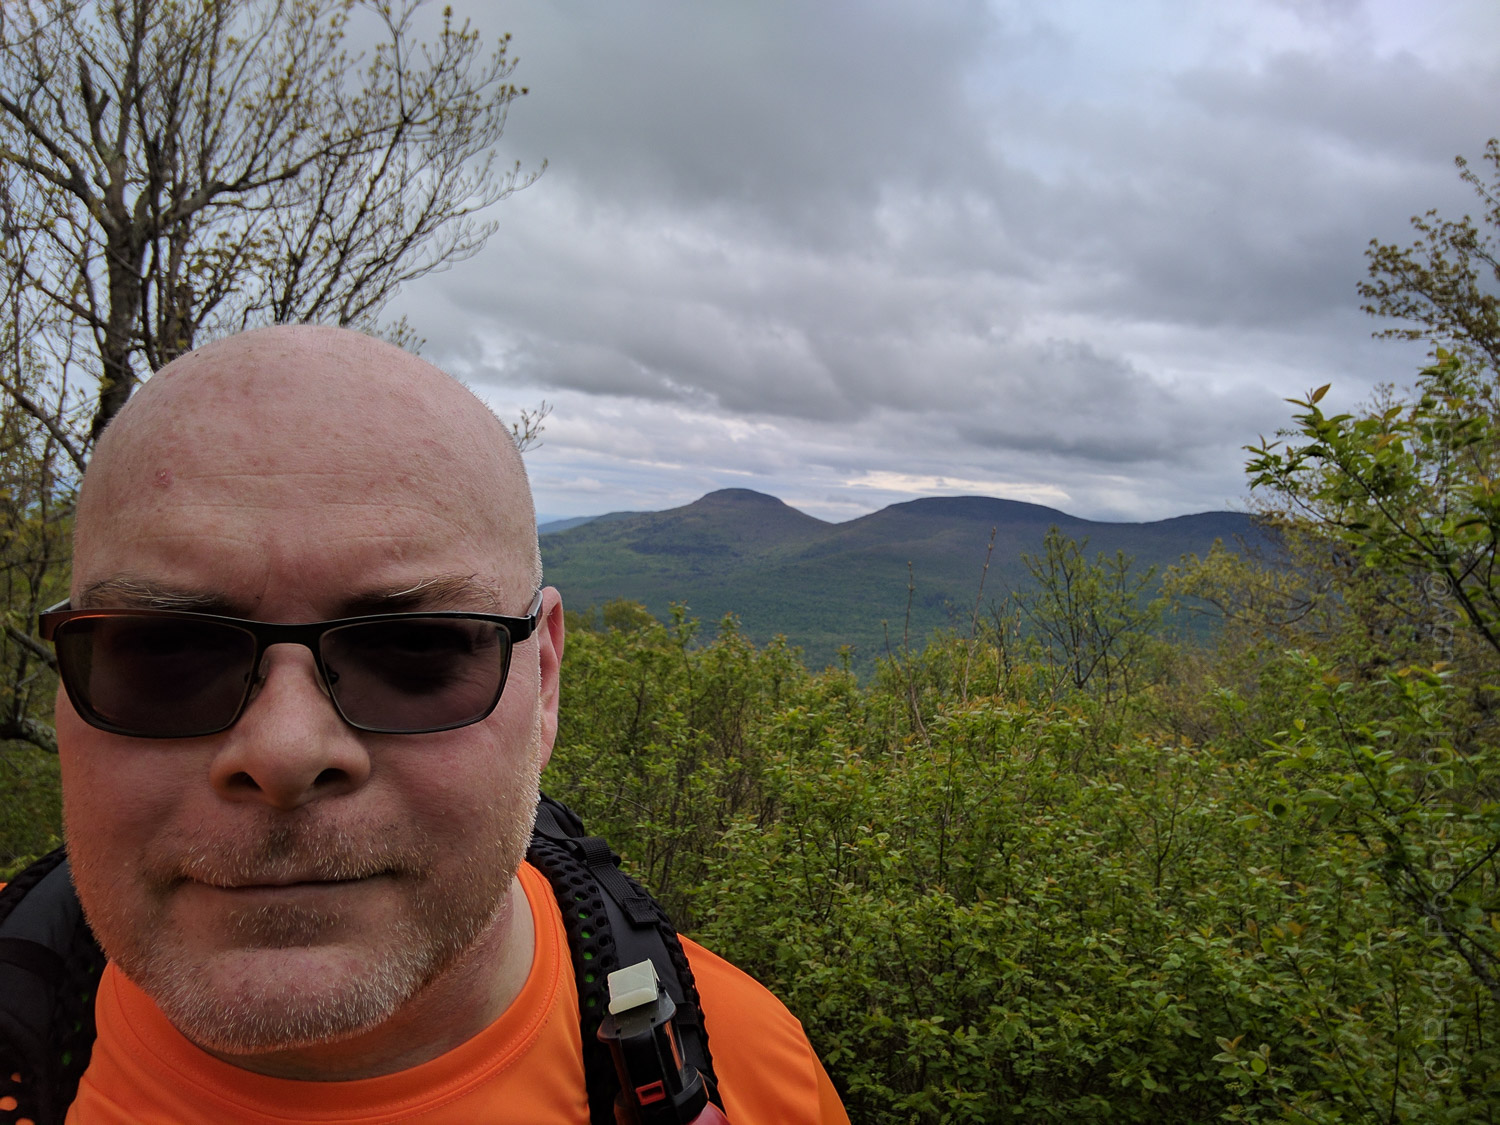 Your's truly, near the summit of Windham High Peak in the Catskill Mountains. That's Blackhead Range in the background.